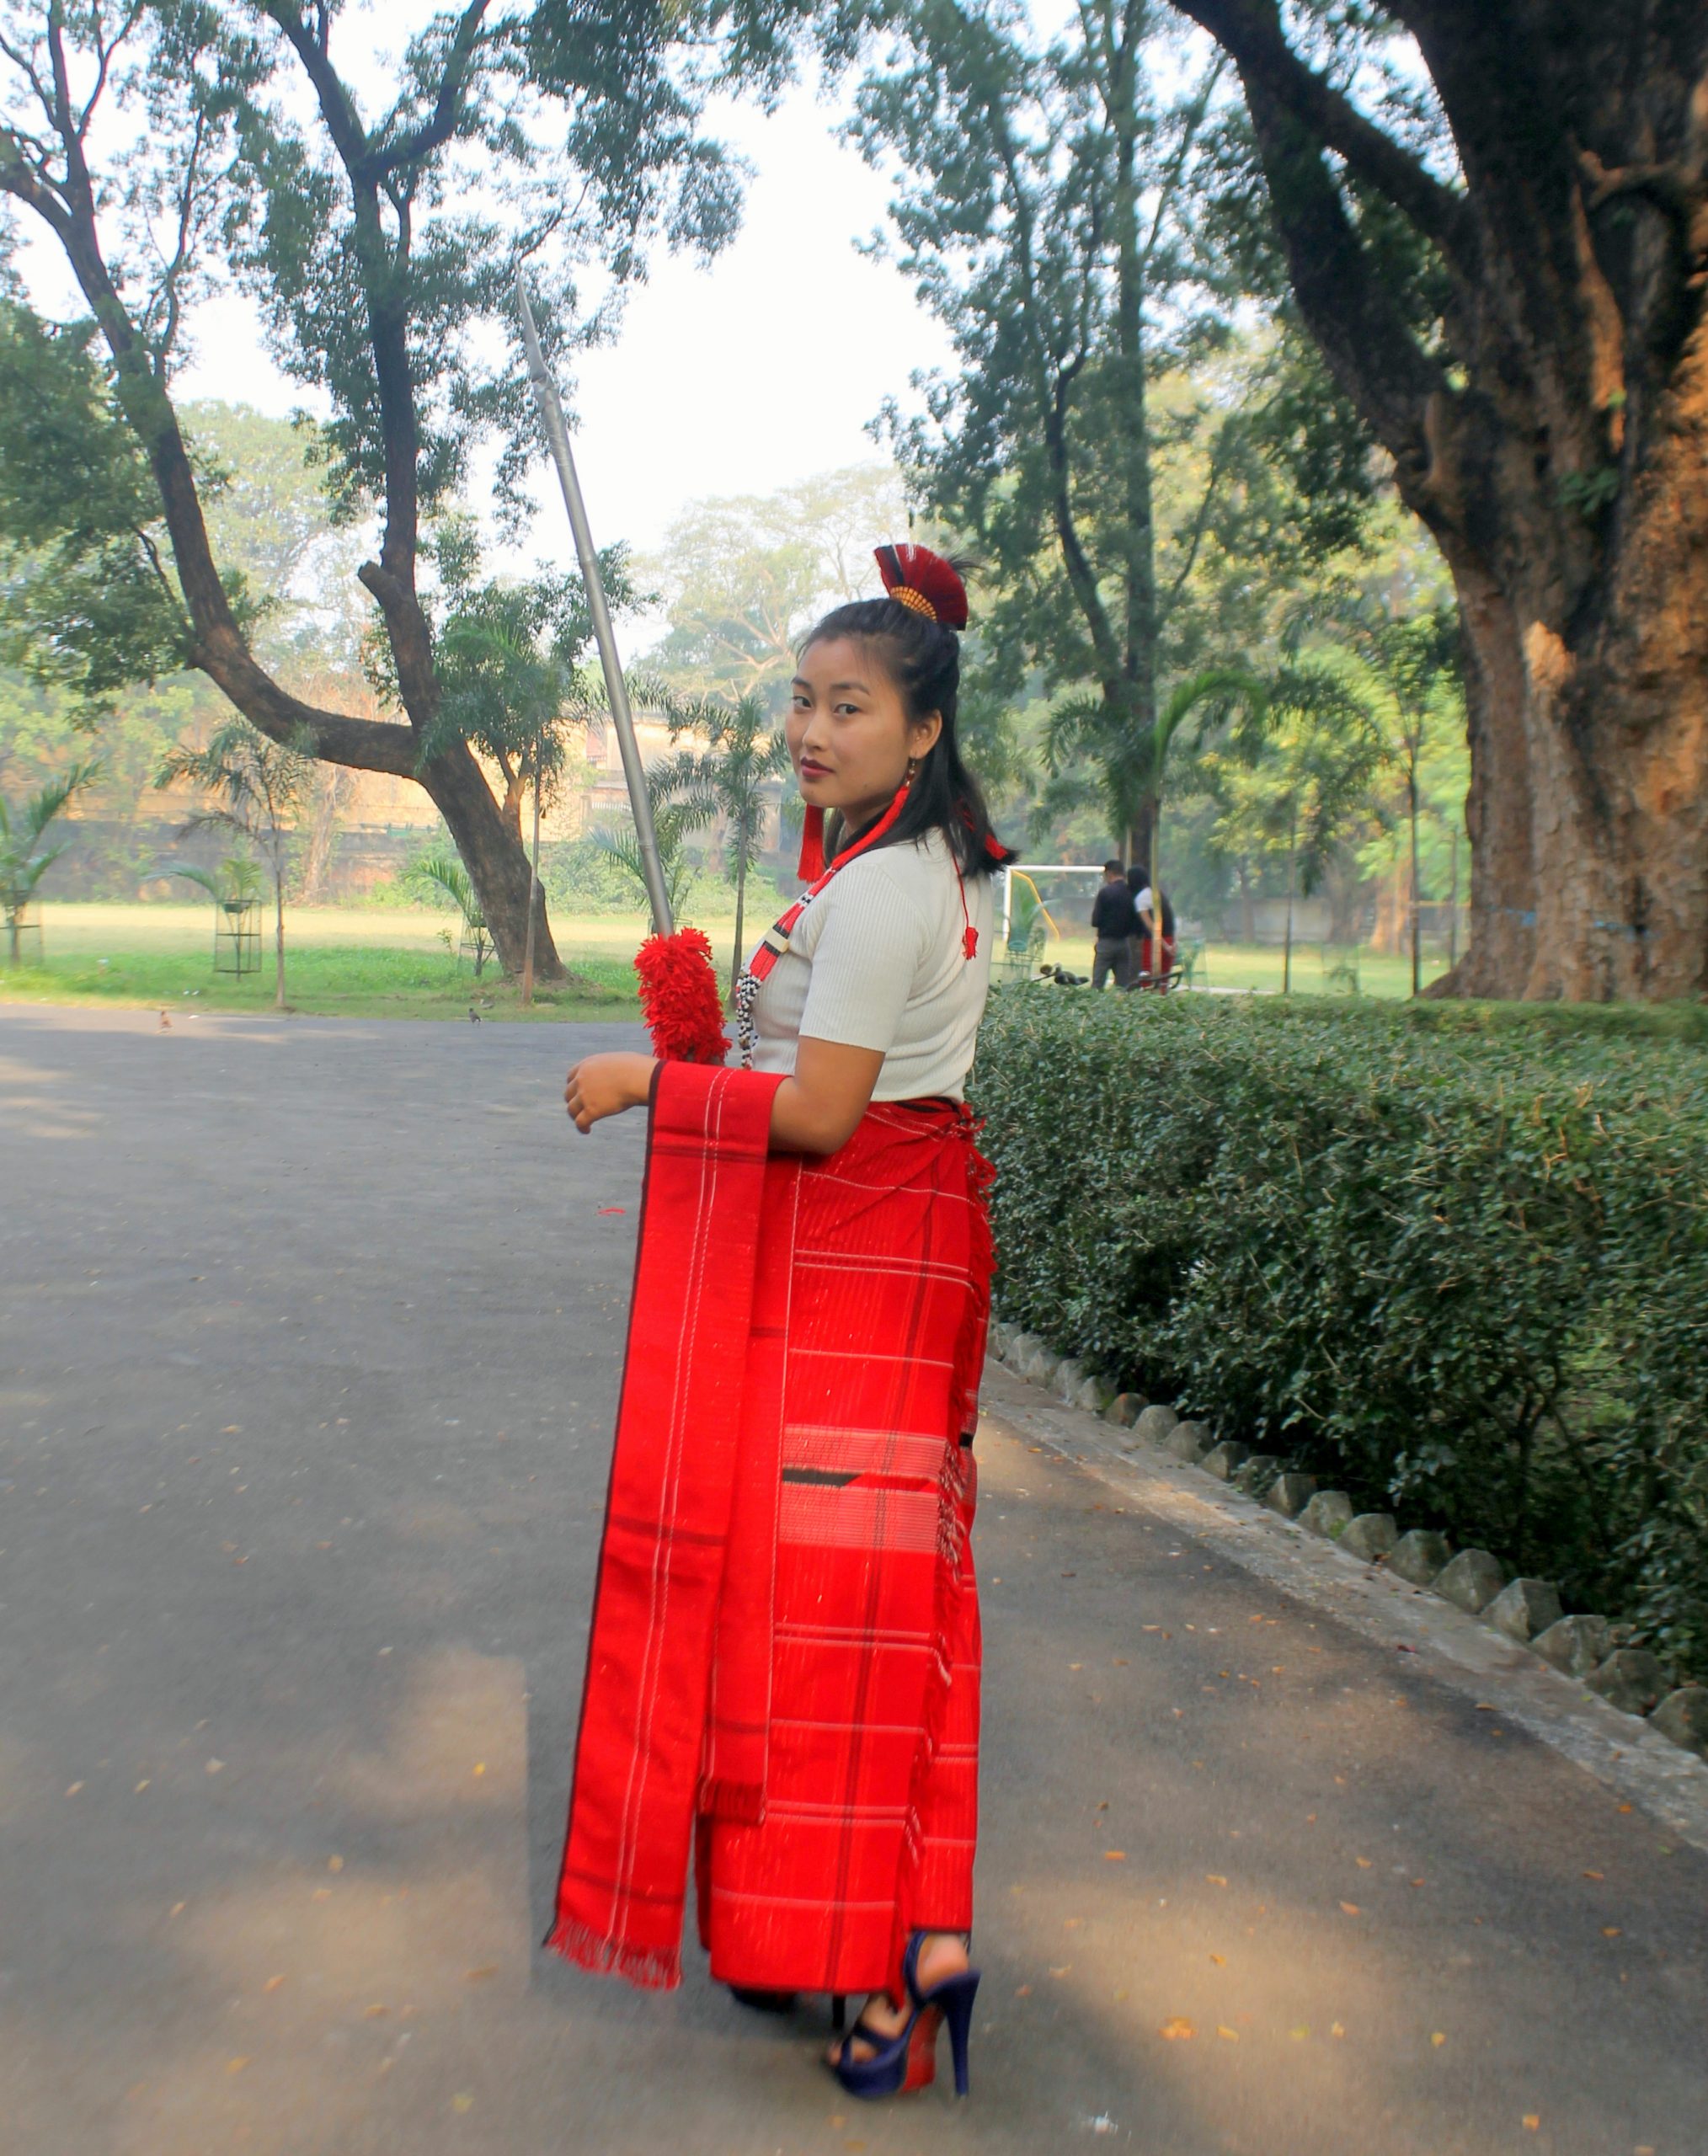 Model in traditional dress